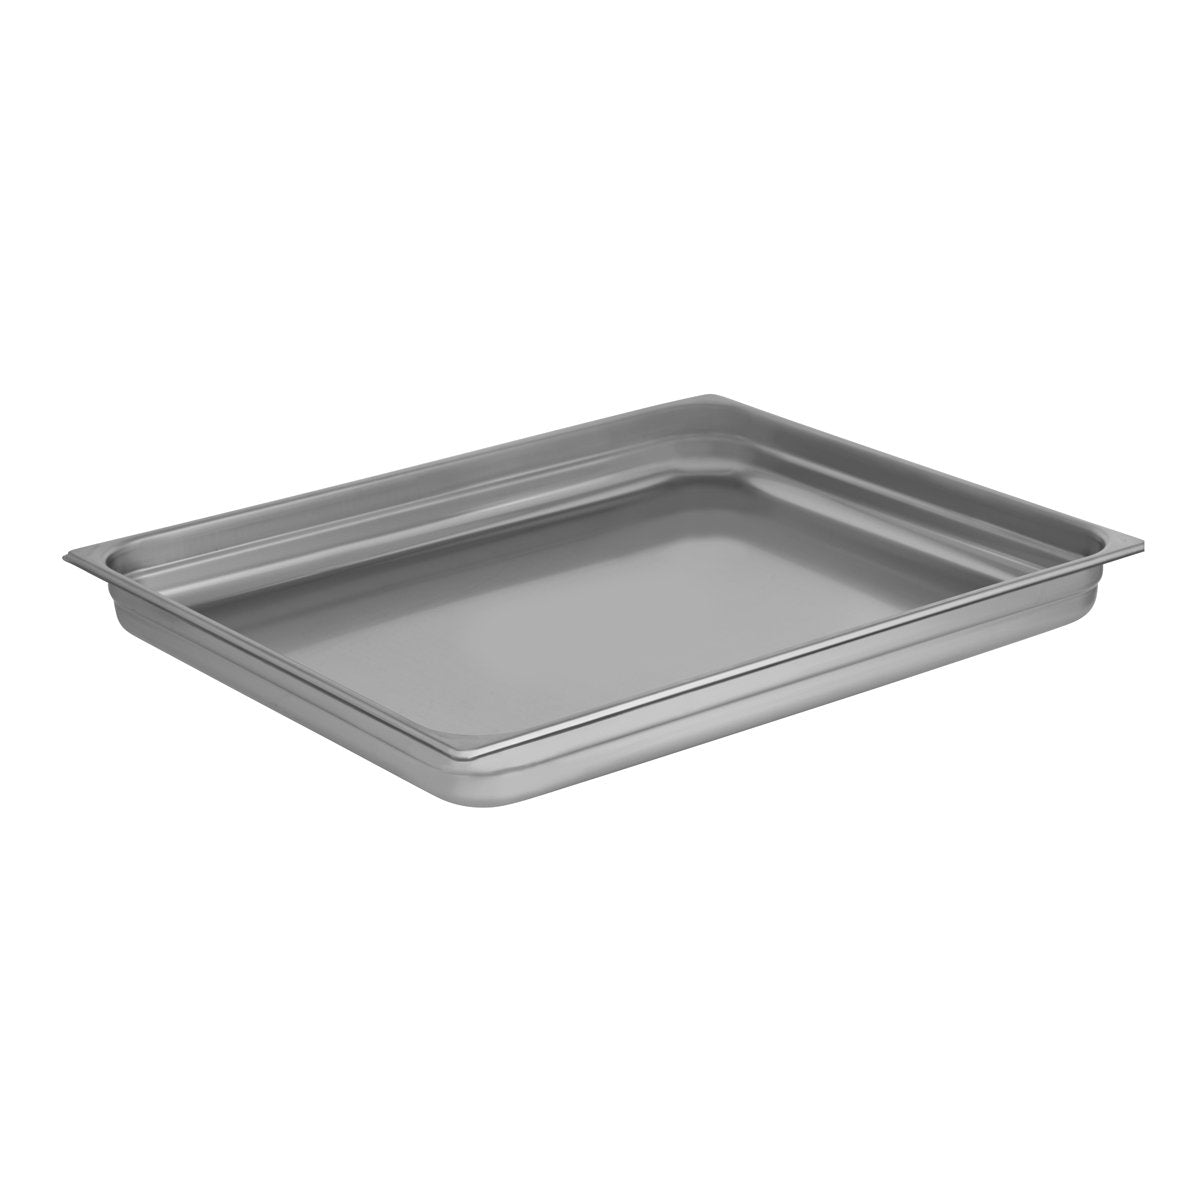 GN-21065 Chef Inox Gastronorm Pan 2/1 Size 65mm Tomkin Australia Hospitality Supplies